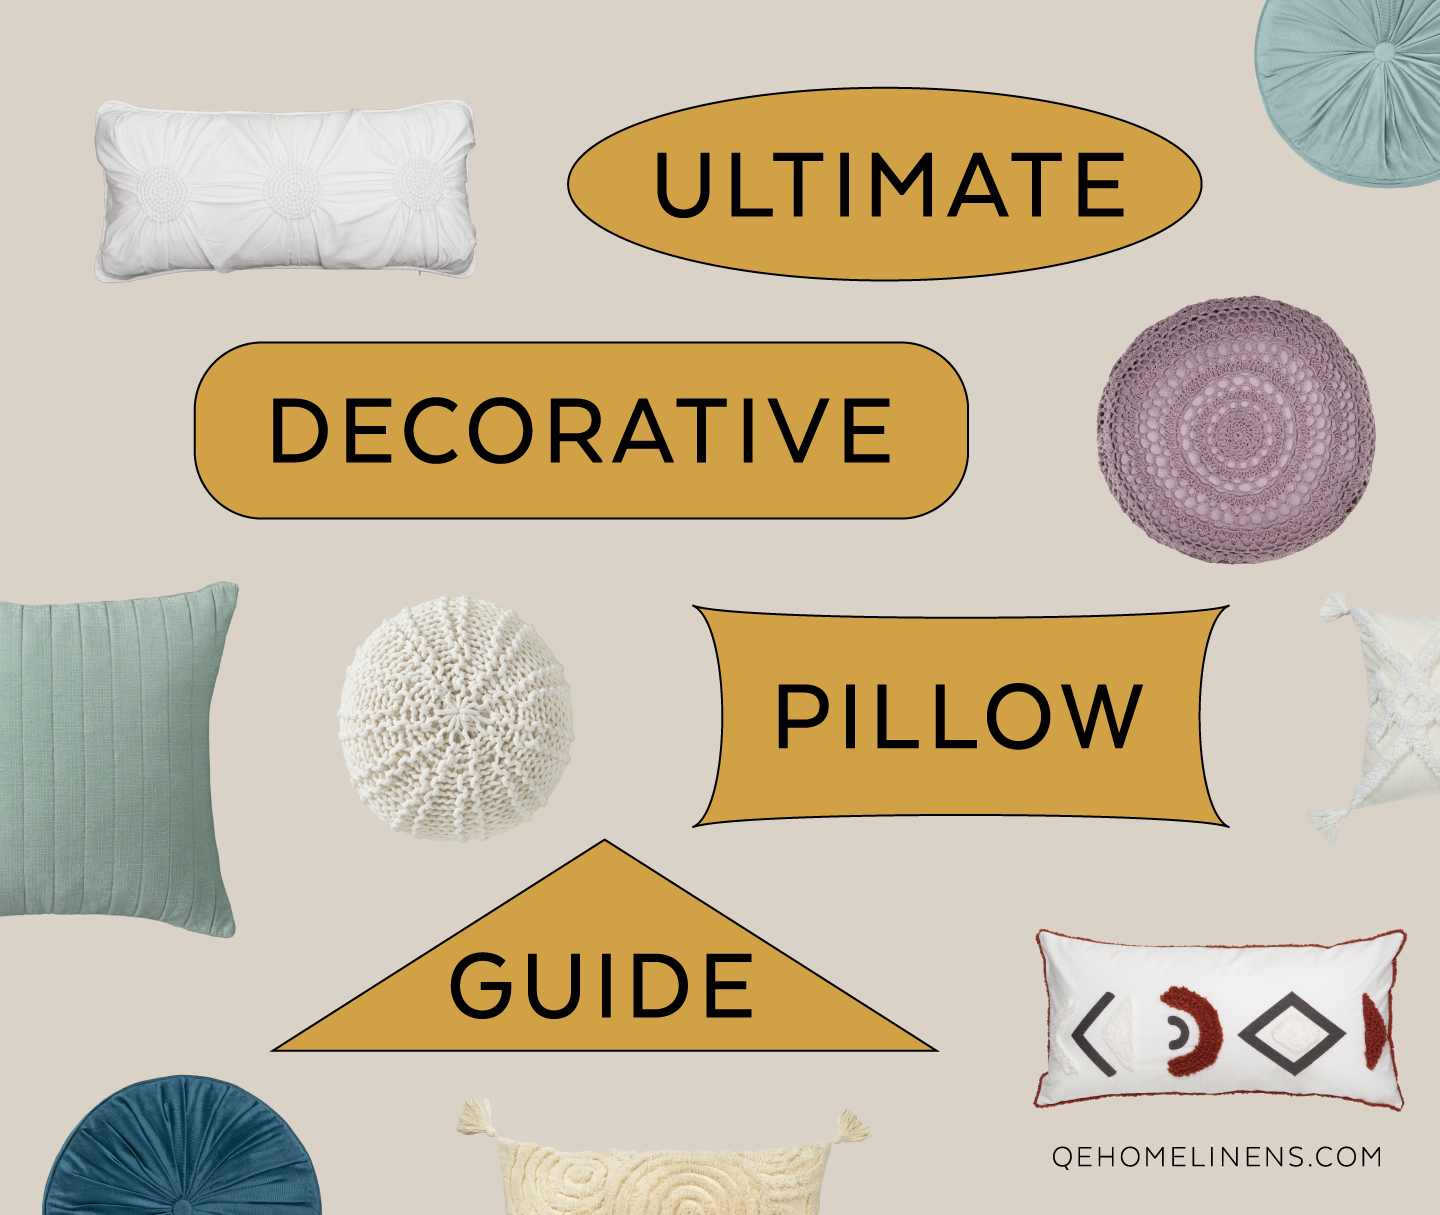 https://cdn11.bigcommerce.com/s-x79kxz20uq/product_images/uploaded_images/ultimate-decorative-pillow-guide-title-card.jpg